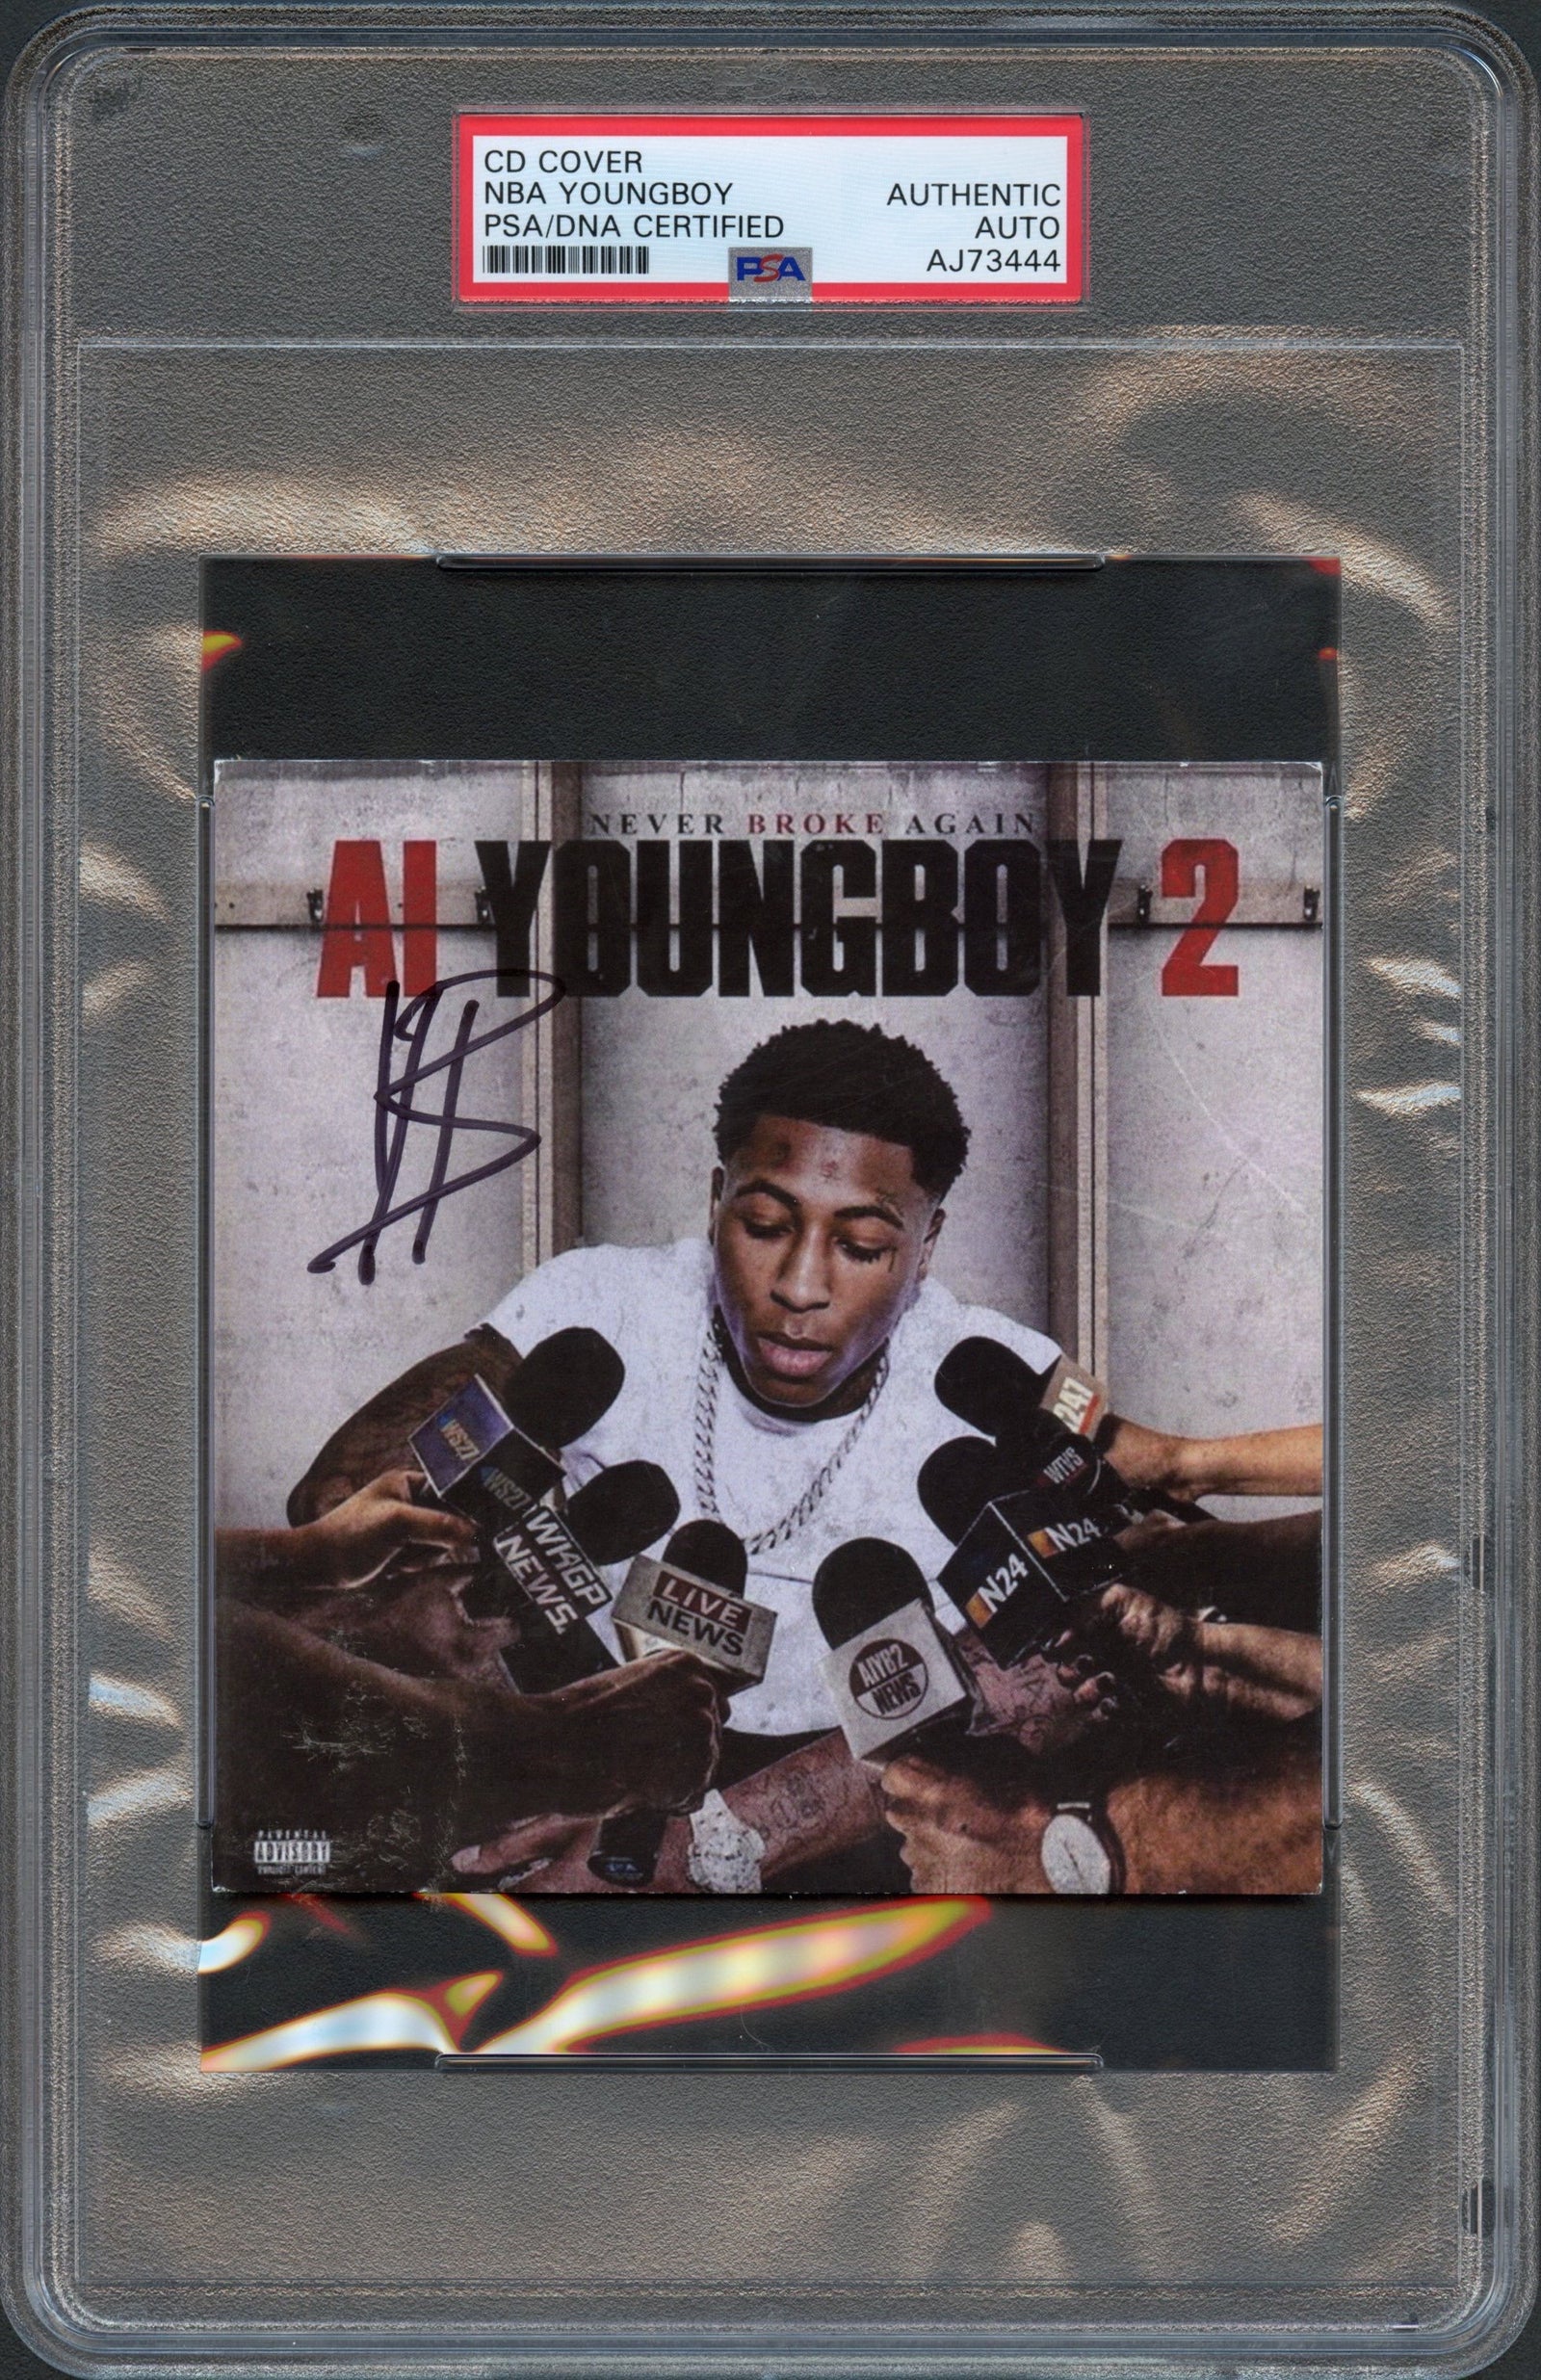 NBA Youngboy Signed Autographed CD “AI Youngboy 2” PSA/DNA Authenticat